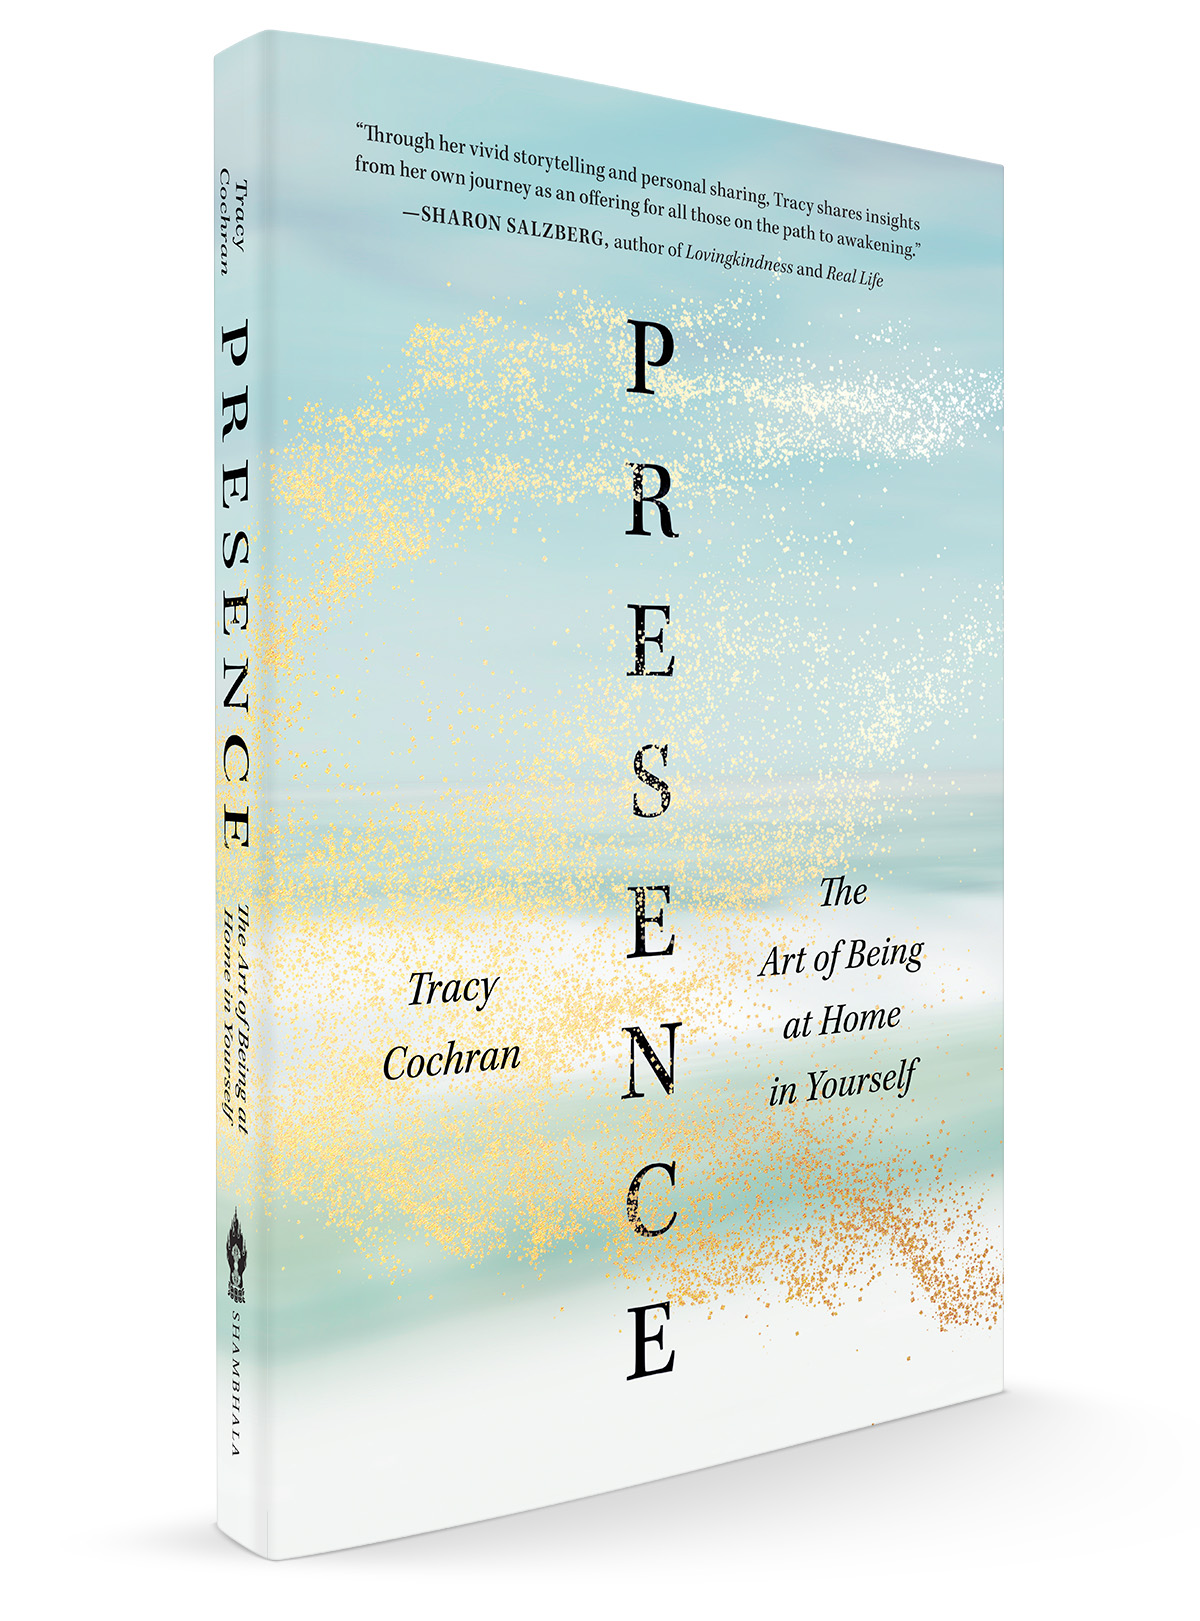 Presence: The Art of Being at Home in Yourself by Tracy Cochran